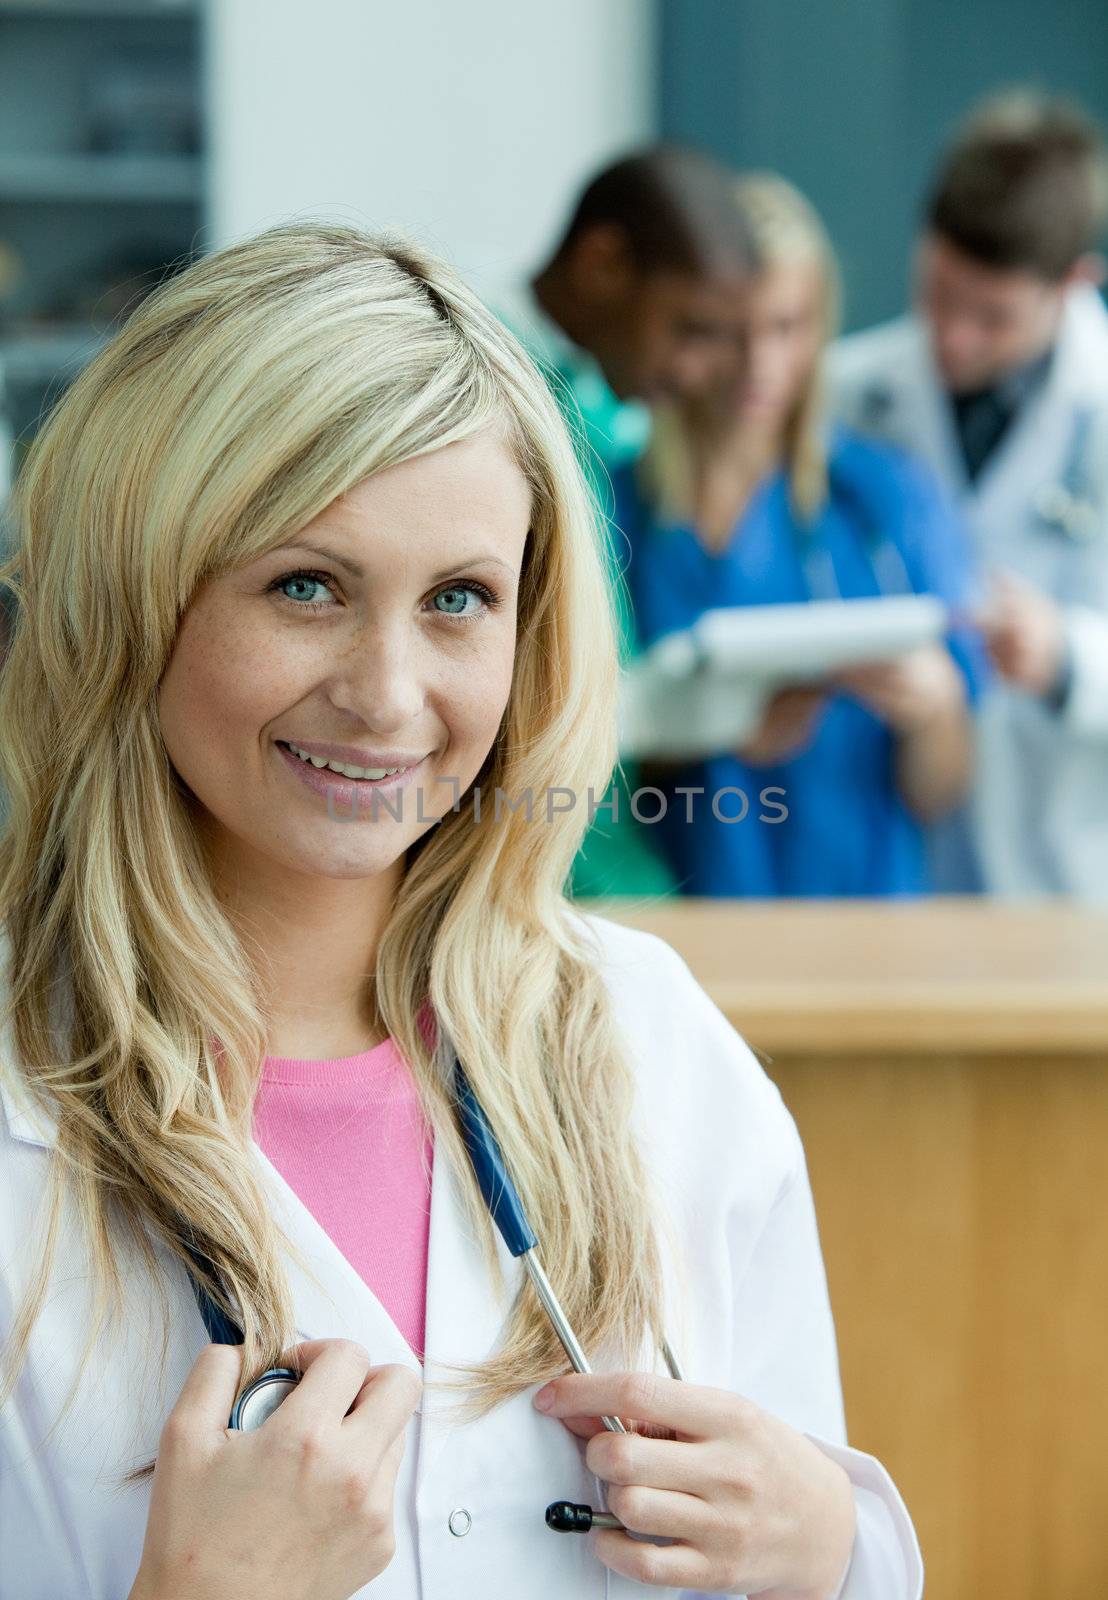 Portrait of a beautiful female surgeon with her team behind her